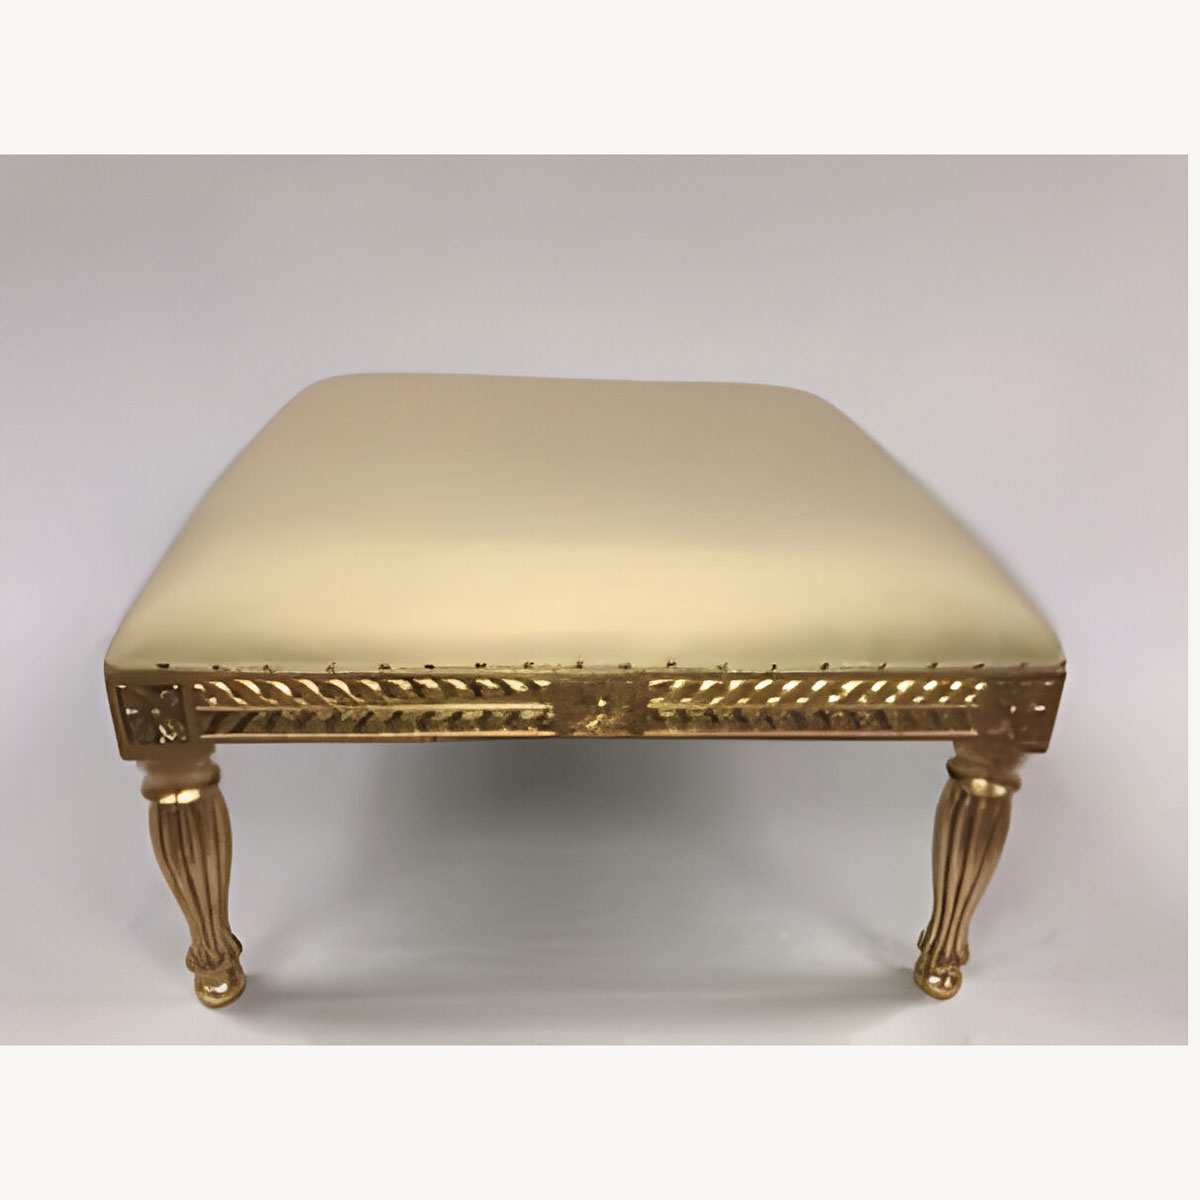 Wedding Large Stool Gold Leaf Frame With Easiclean Faux Leather 3 - Hampshire Barn Interiors - Wedding Large Stool Gold Leaf Frame With Easiclean Faux Leather -